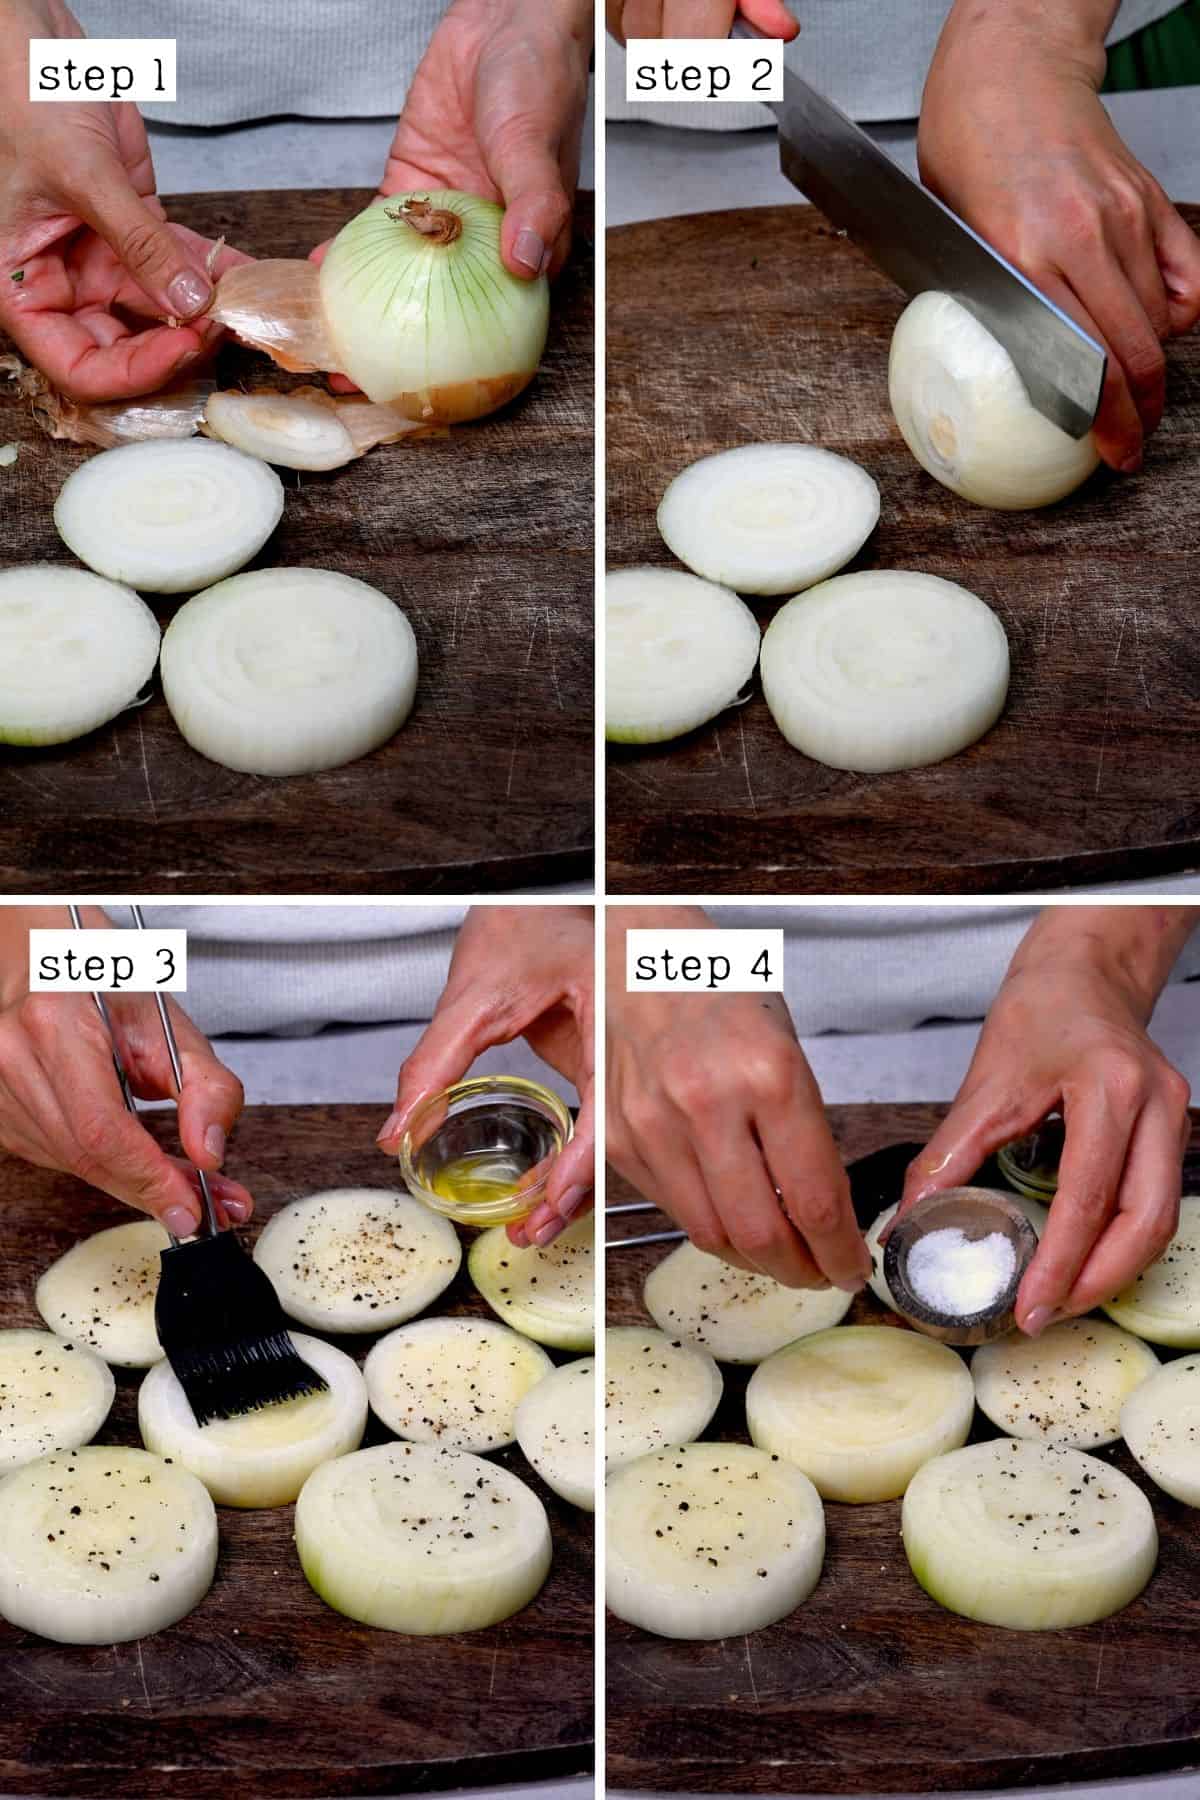 Steps for cutting and seasoning onions